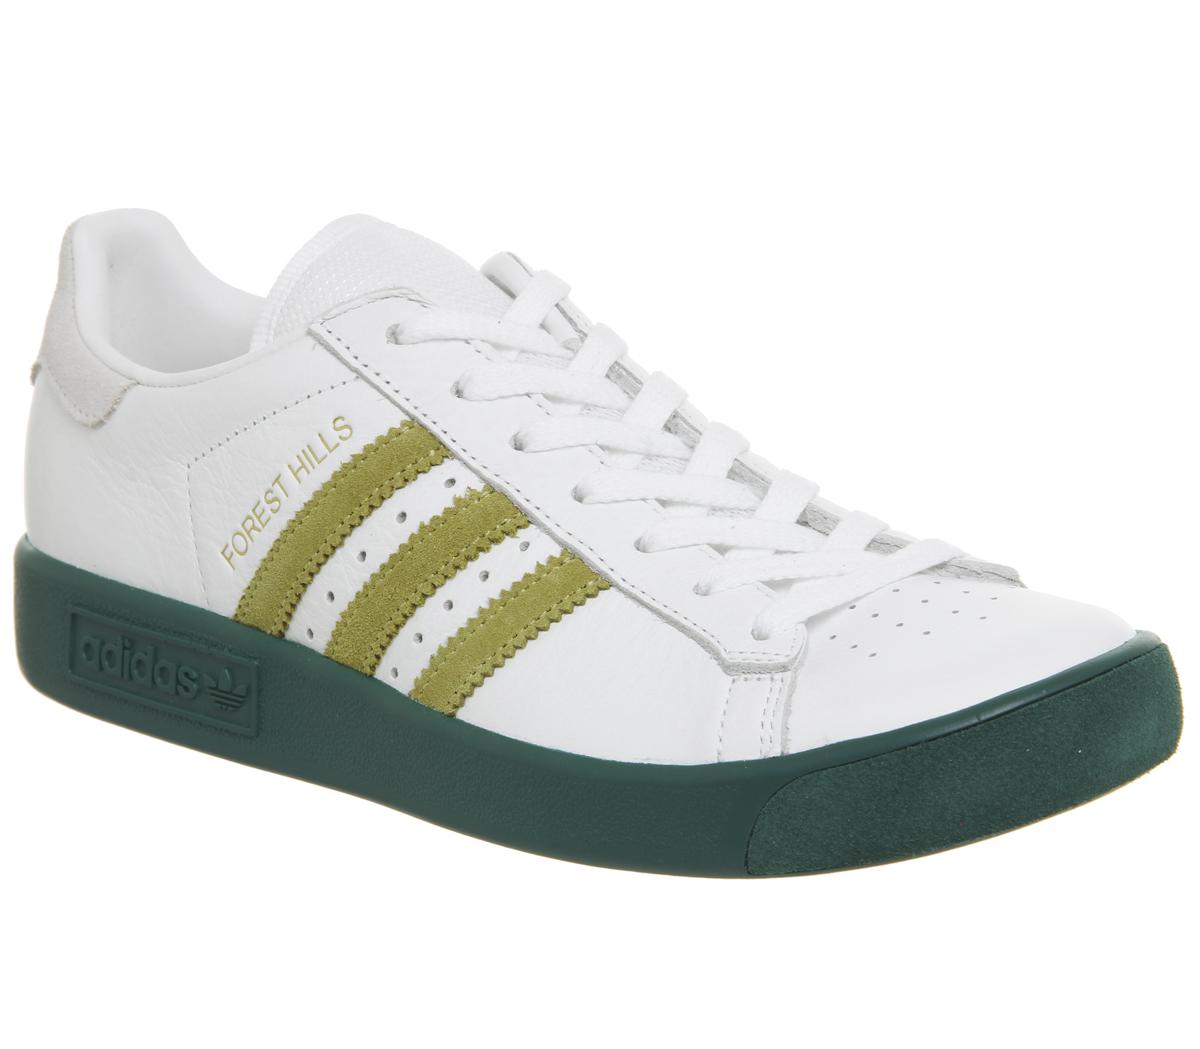 adidas forest hills gold - 64% remise 